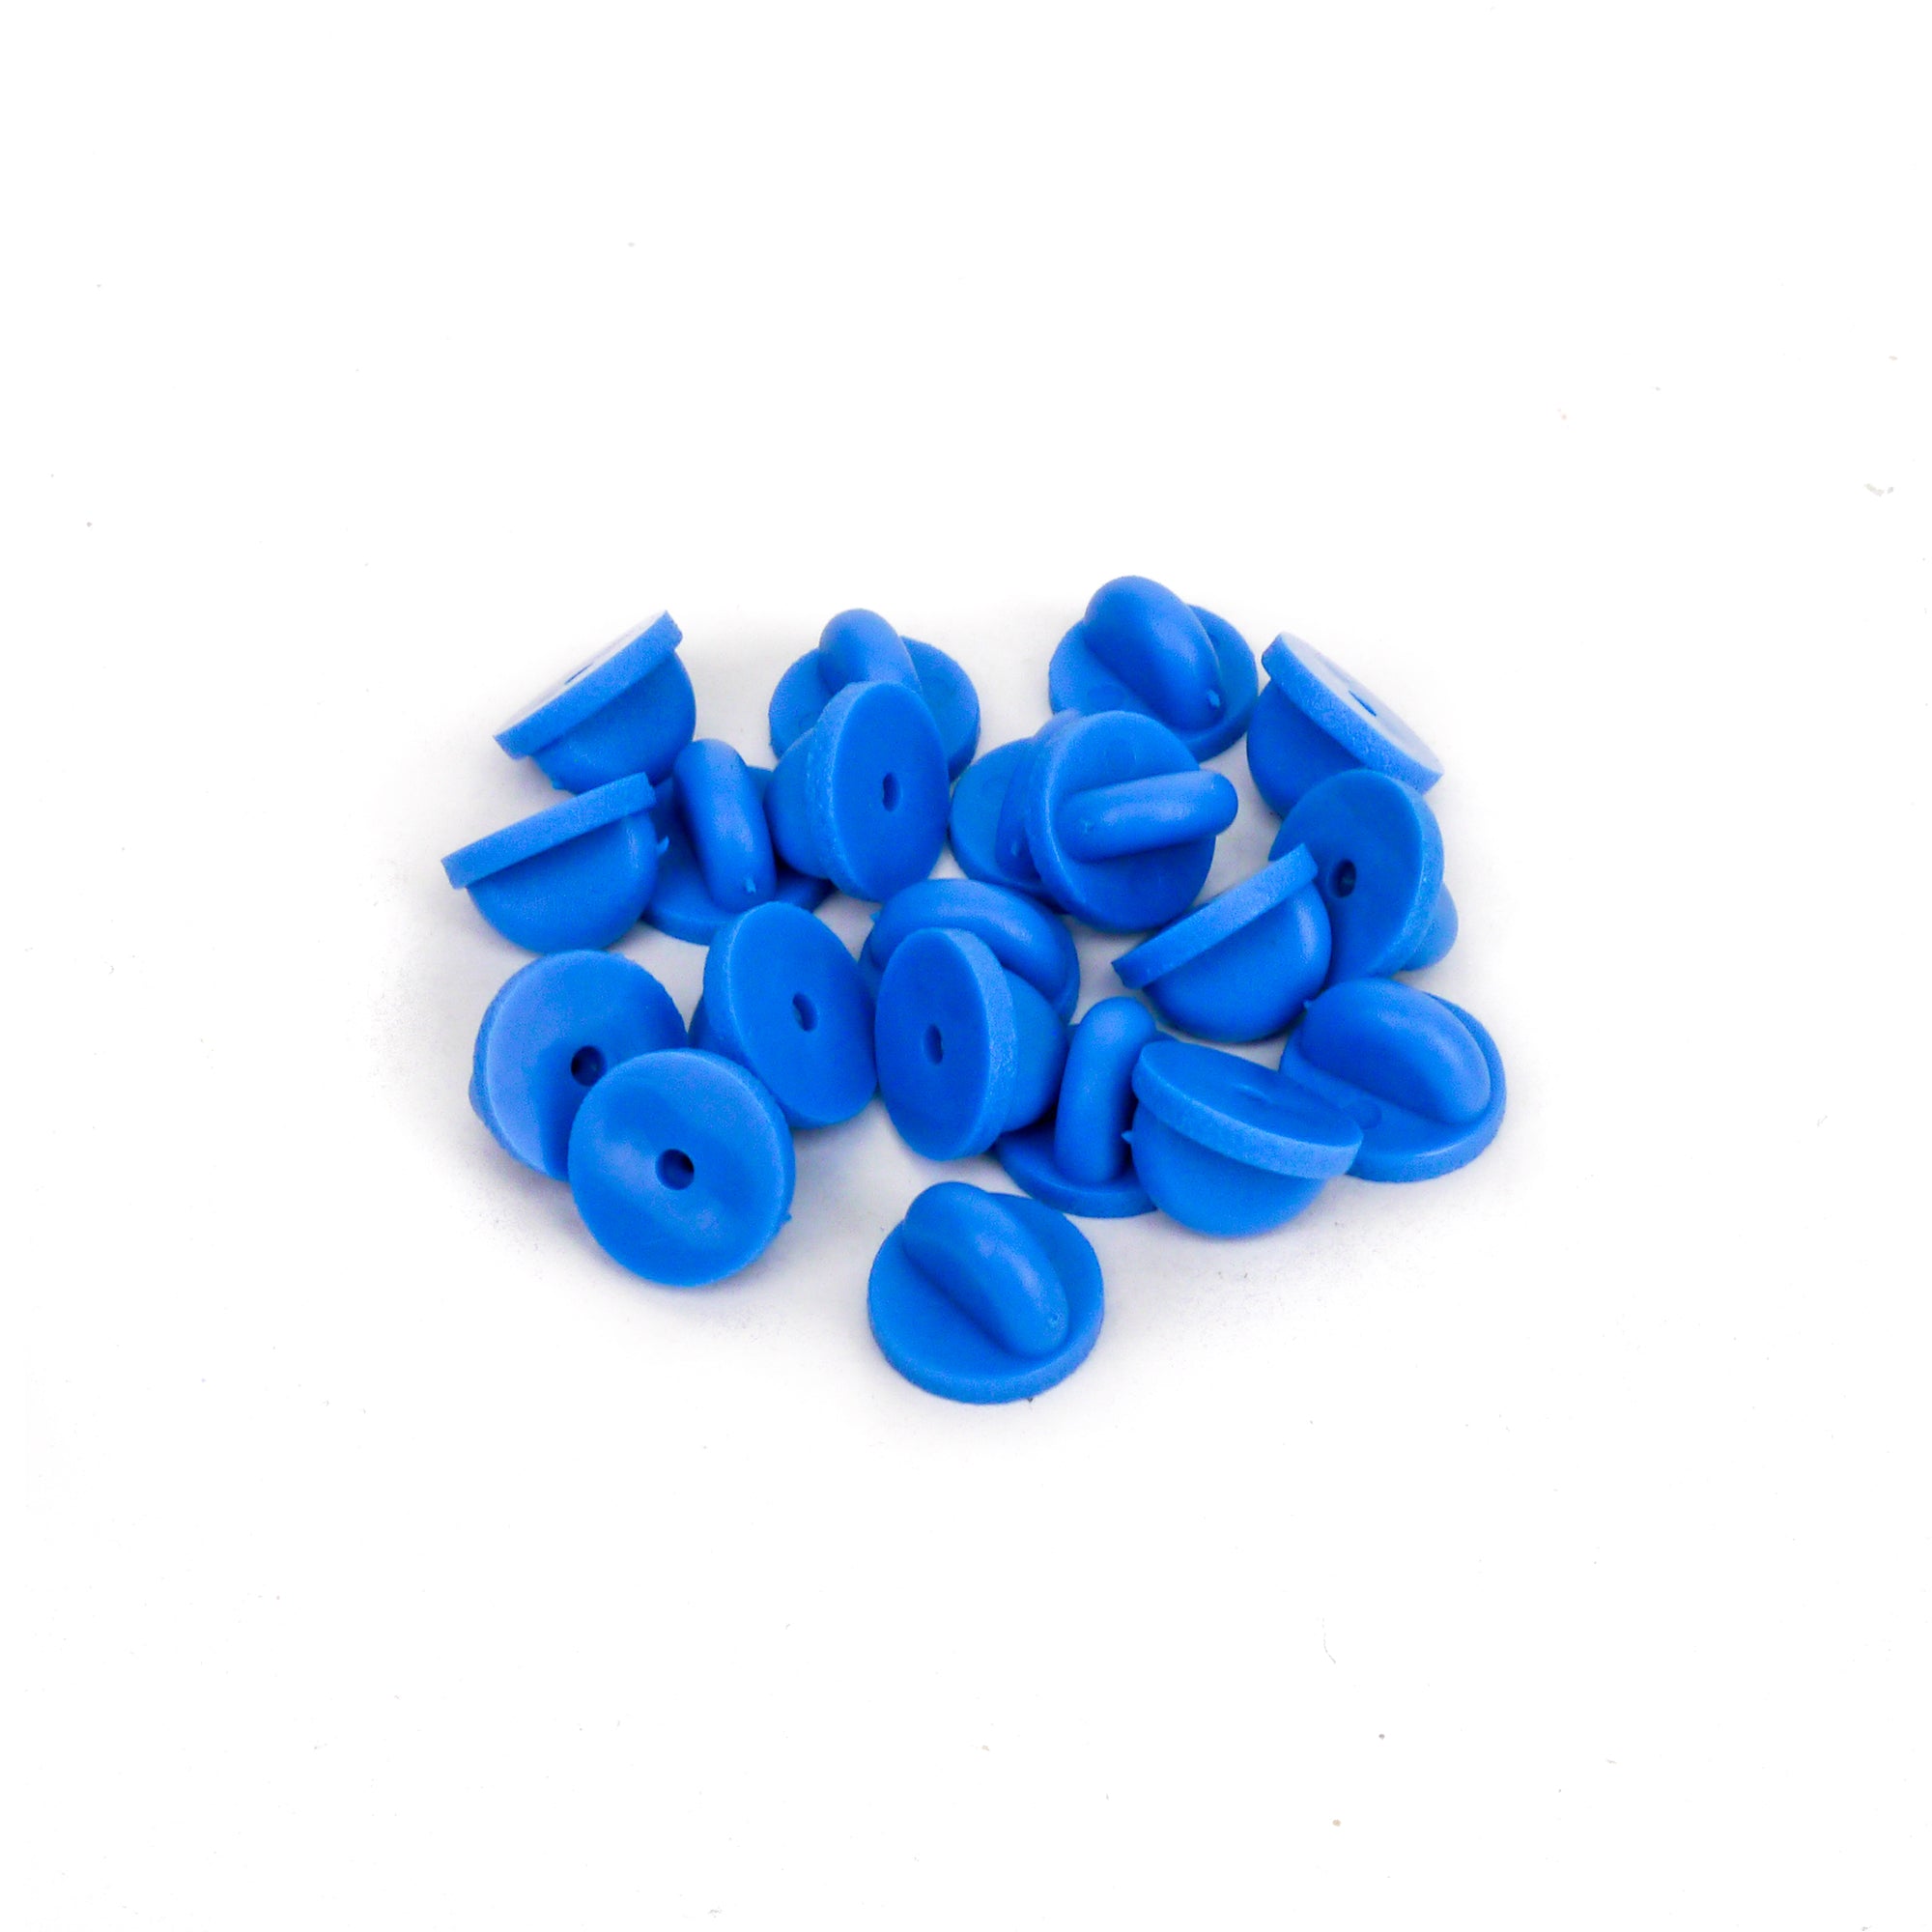 Blue Rubber Clutches (Backings Clasp) for Enamel Pin Back